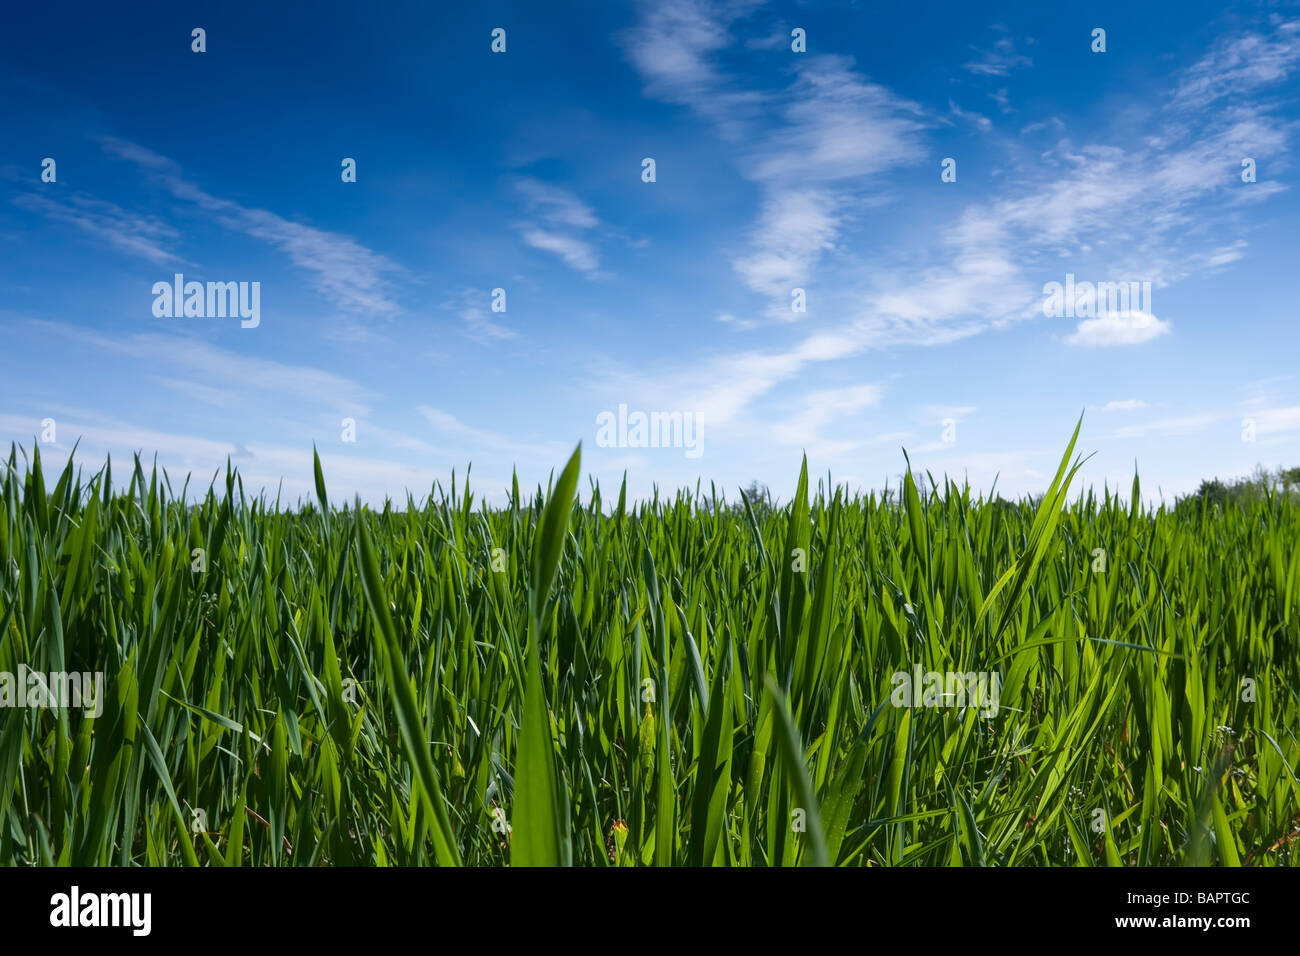 Young Wheat plants against a blue sky. Stock Photo